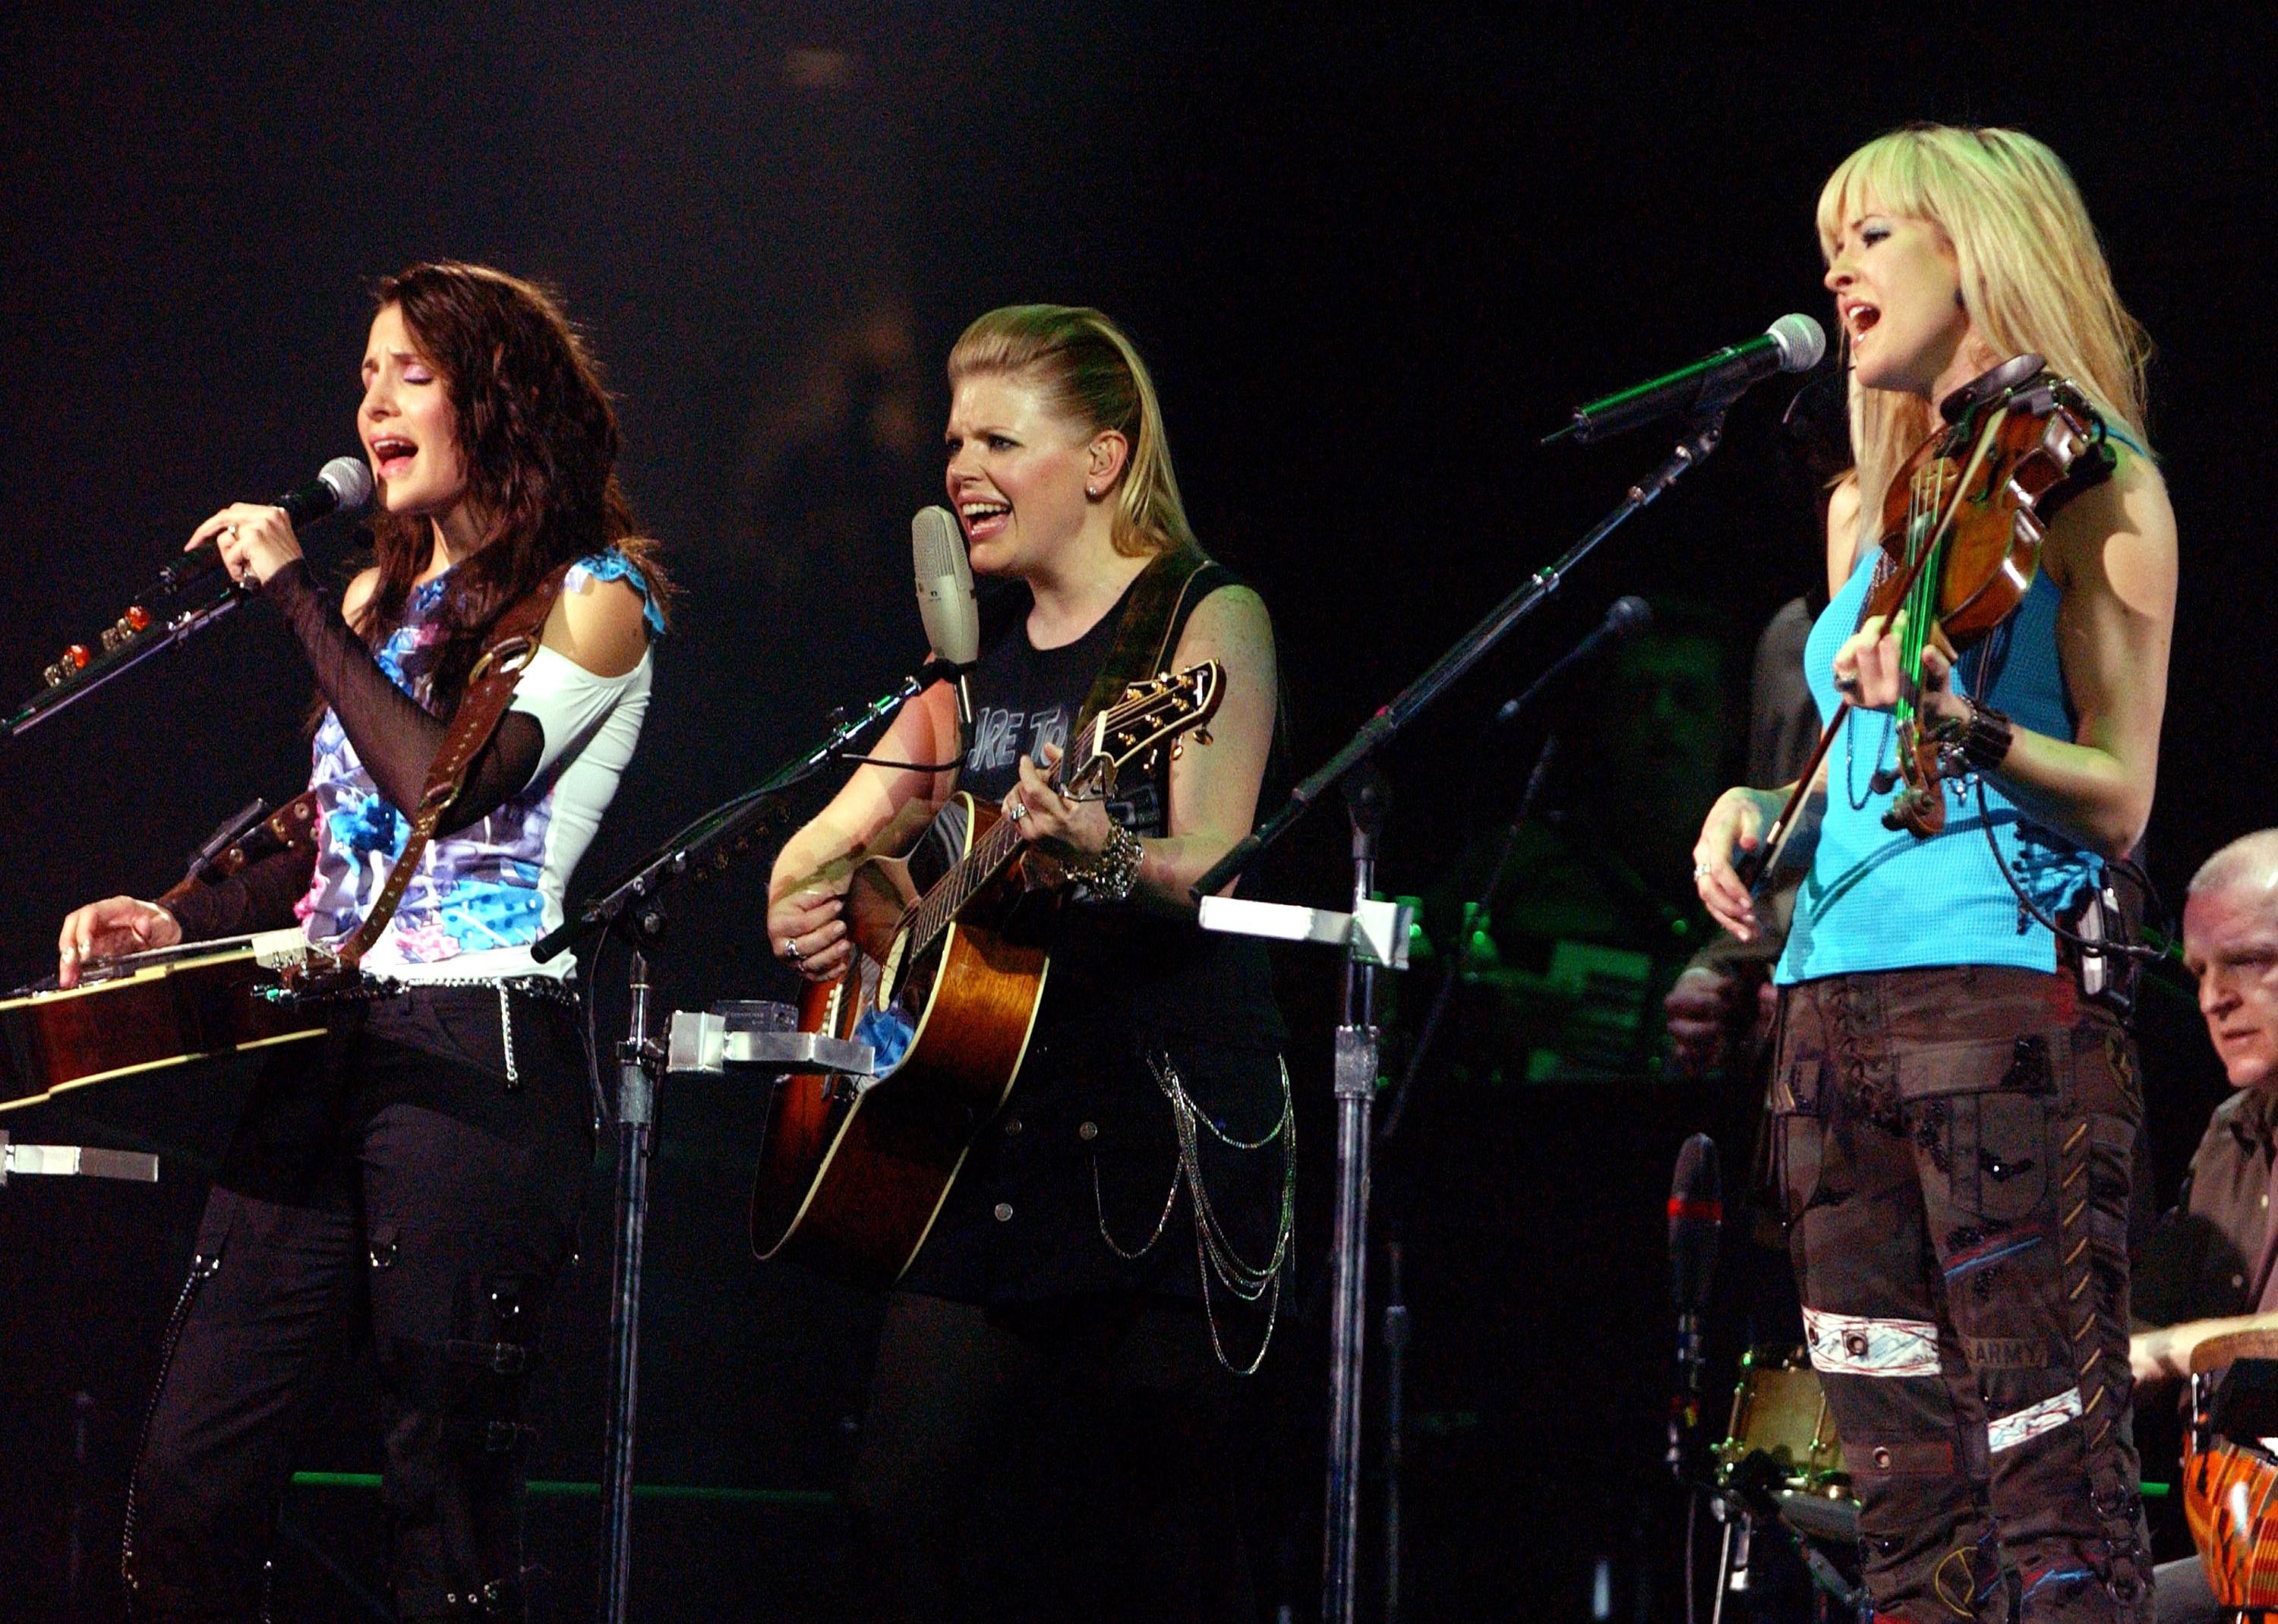 Emily Robison, Natalie Maines and Martie Seidel of Dixie Chicks performing at the 2003 U.S. Tour opening show.